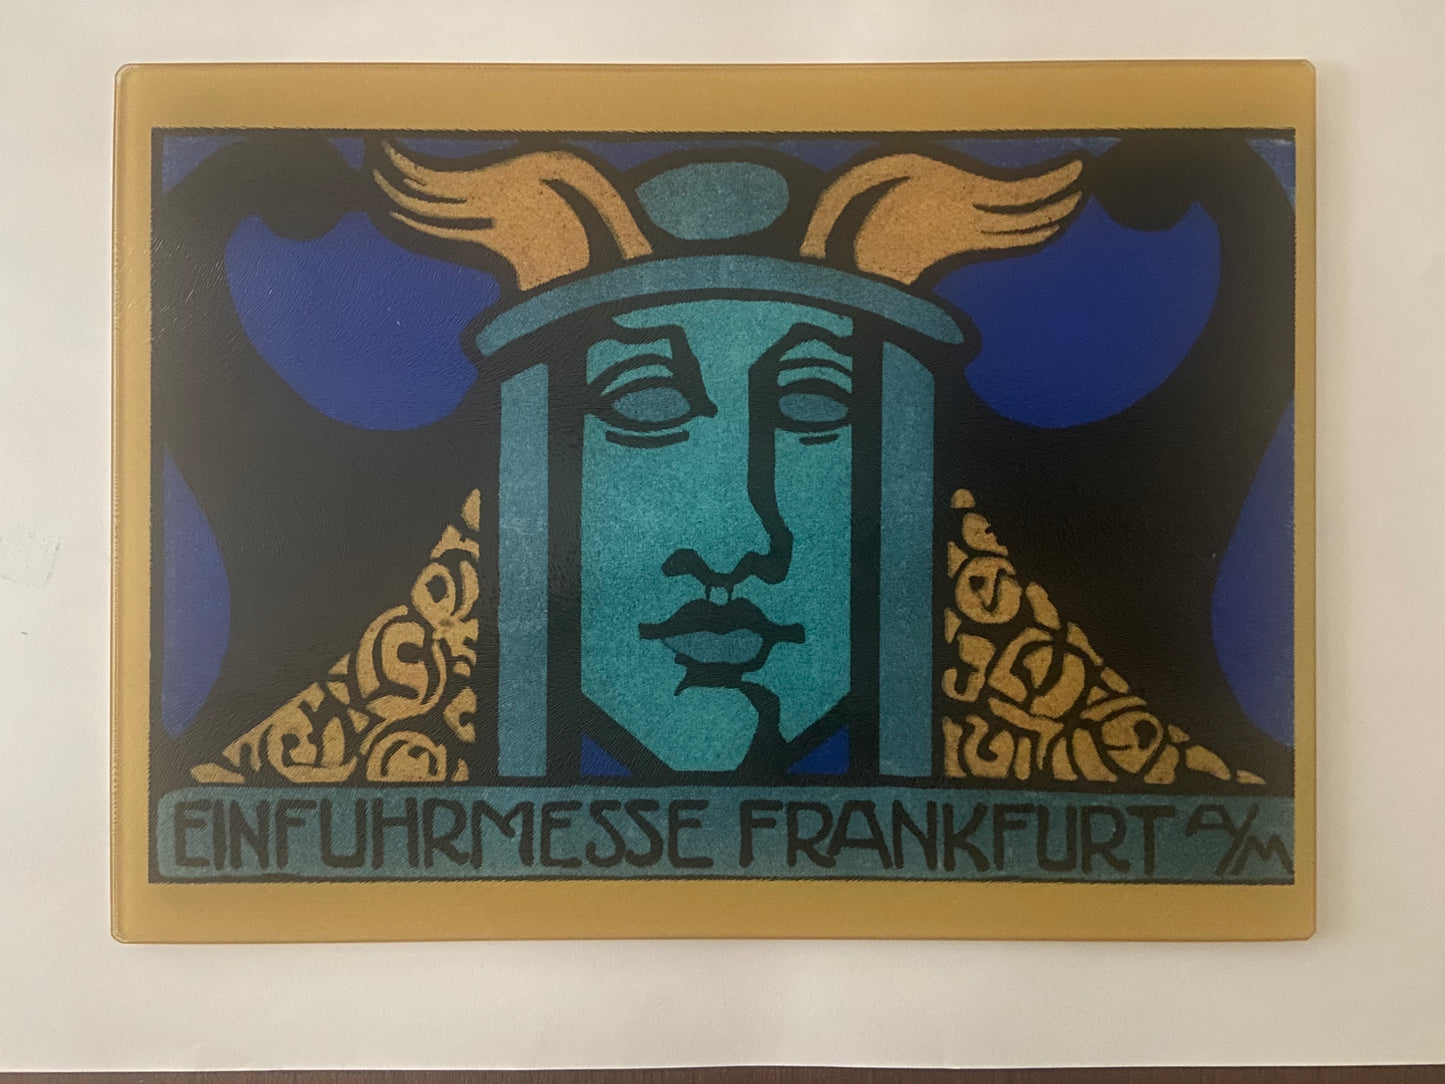 Iconic Norse Goddess From 1923 German Art Show As A Brilliant Tempered Glass Cutting Board